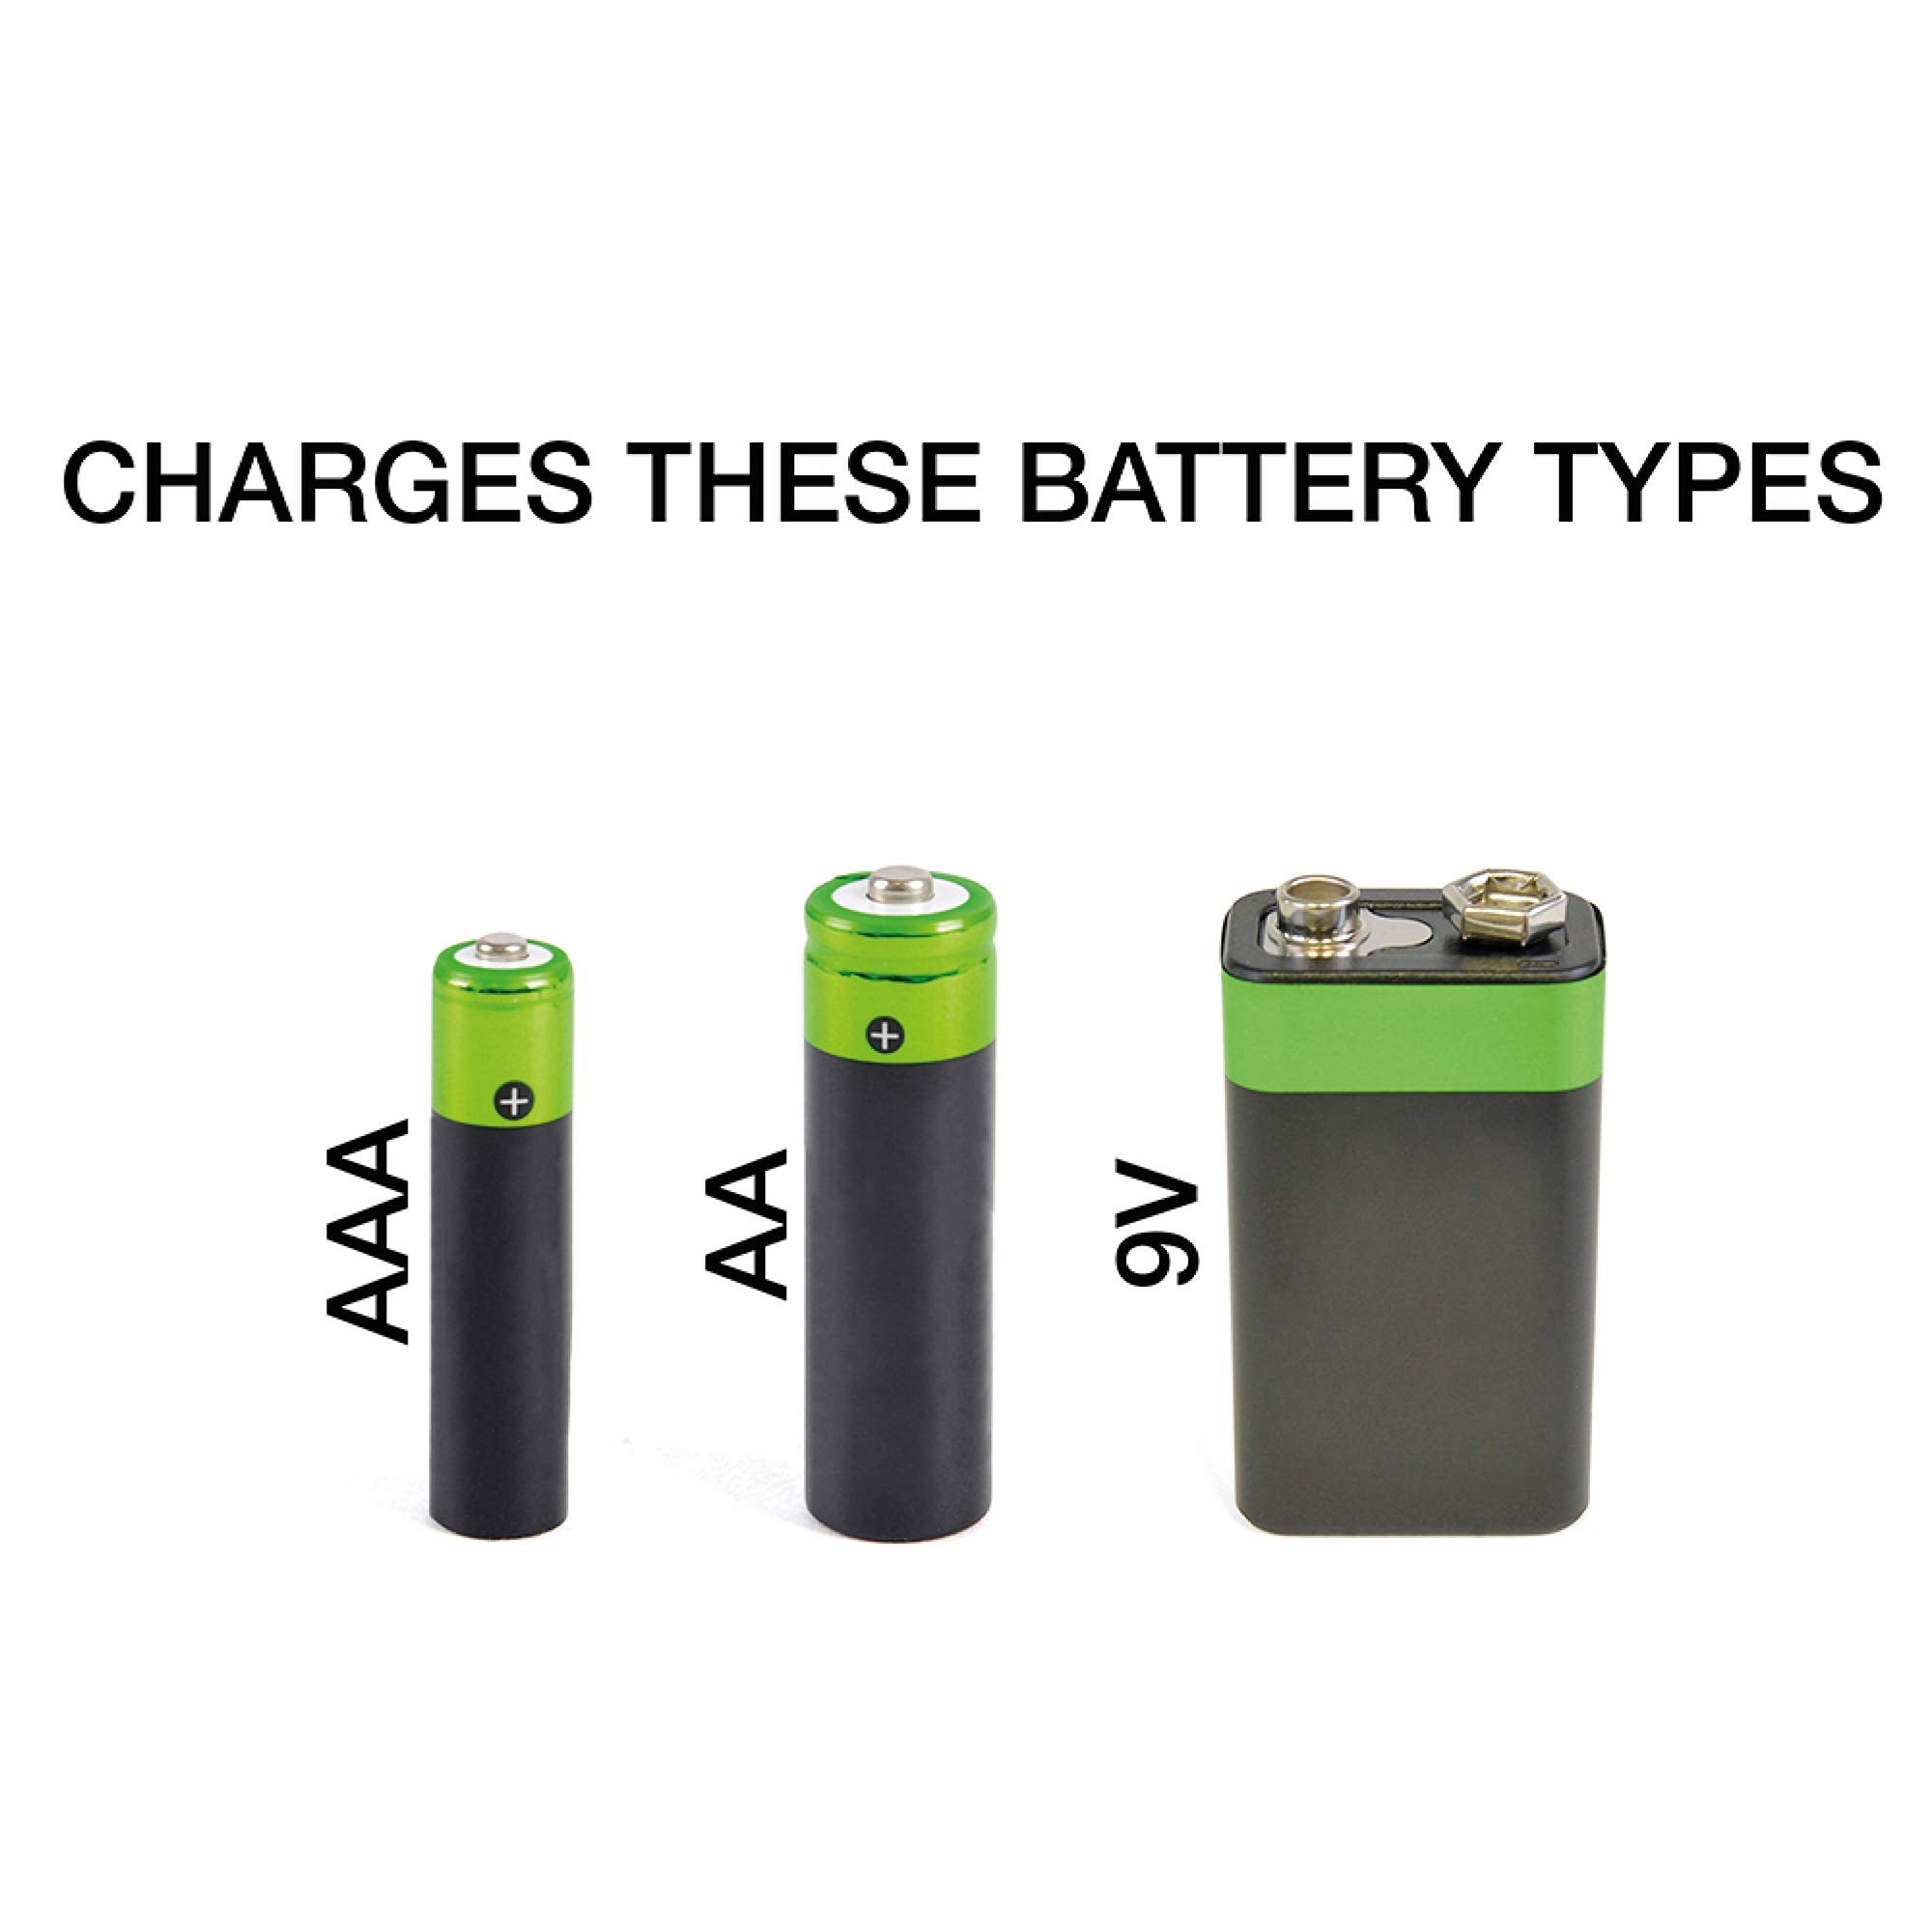 LLOYTRON Compact AA or AAA 9v (PP3) Battery Charger for NiMh NiCd Rechargeable Batteries – Charge 2 or 4 Batteries at Once – B1502 - Silver